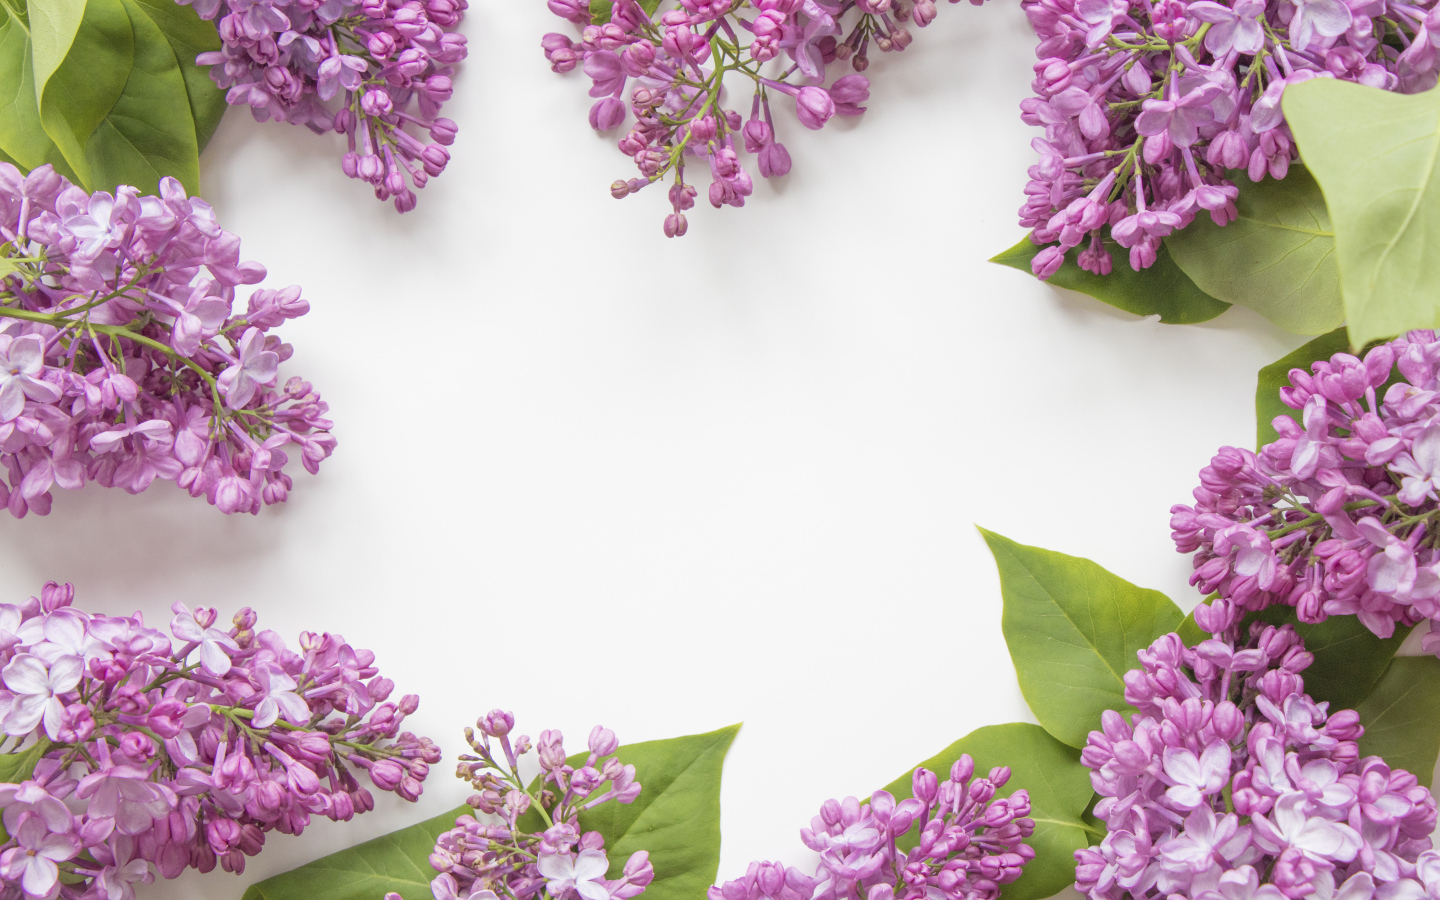 Lilac flowers on a gray background